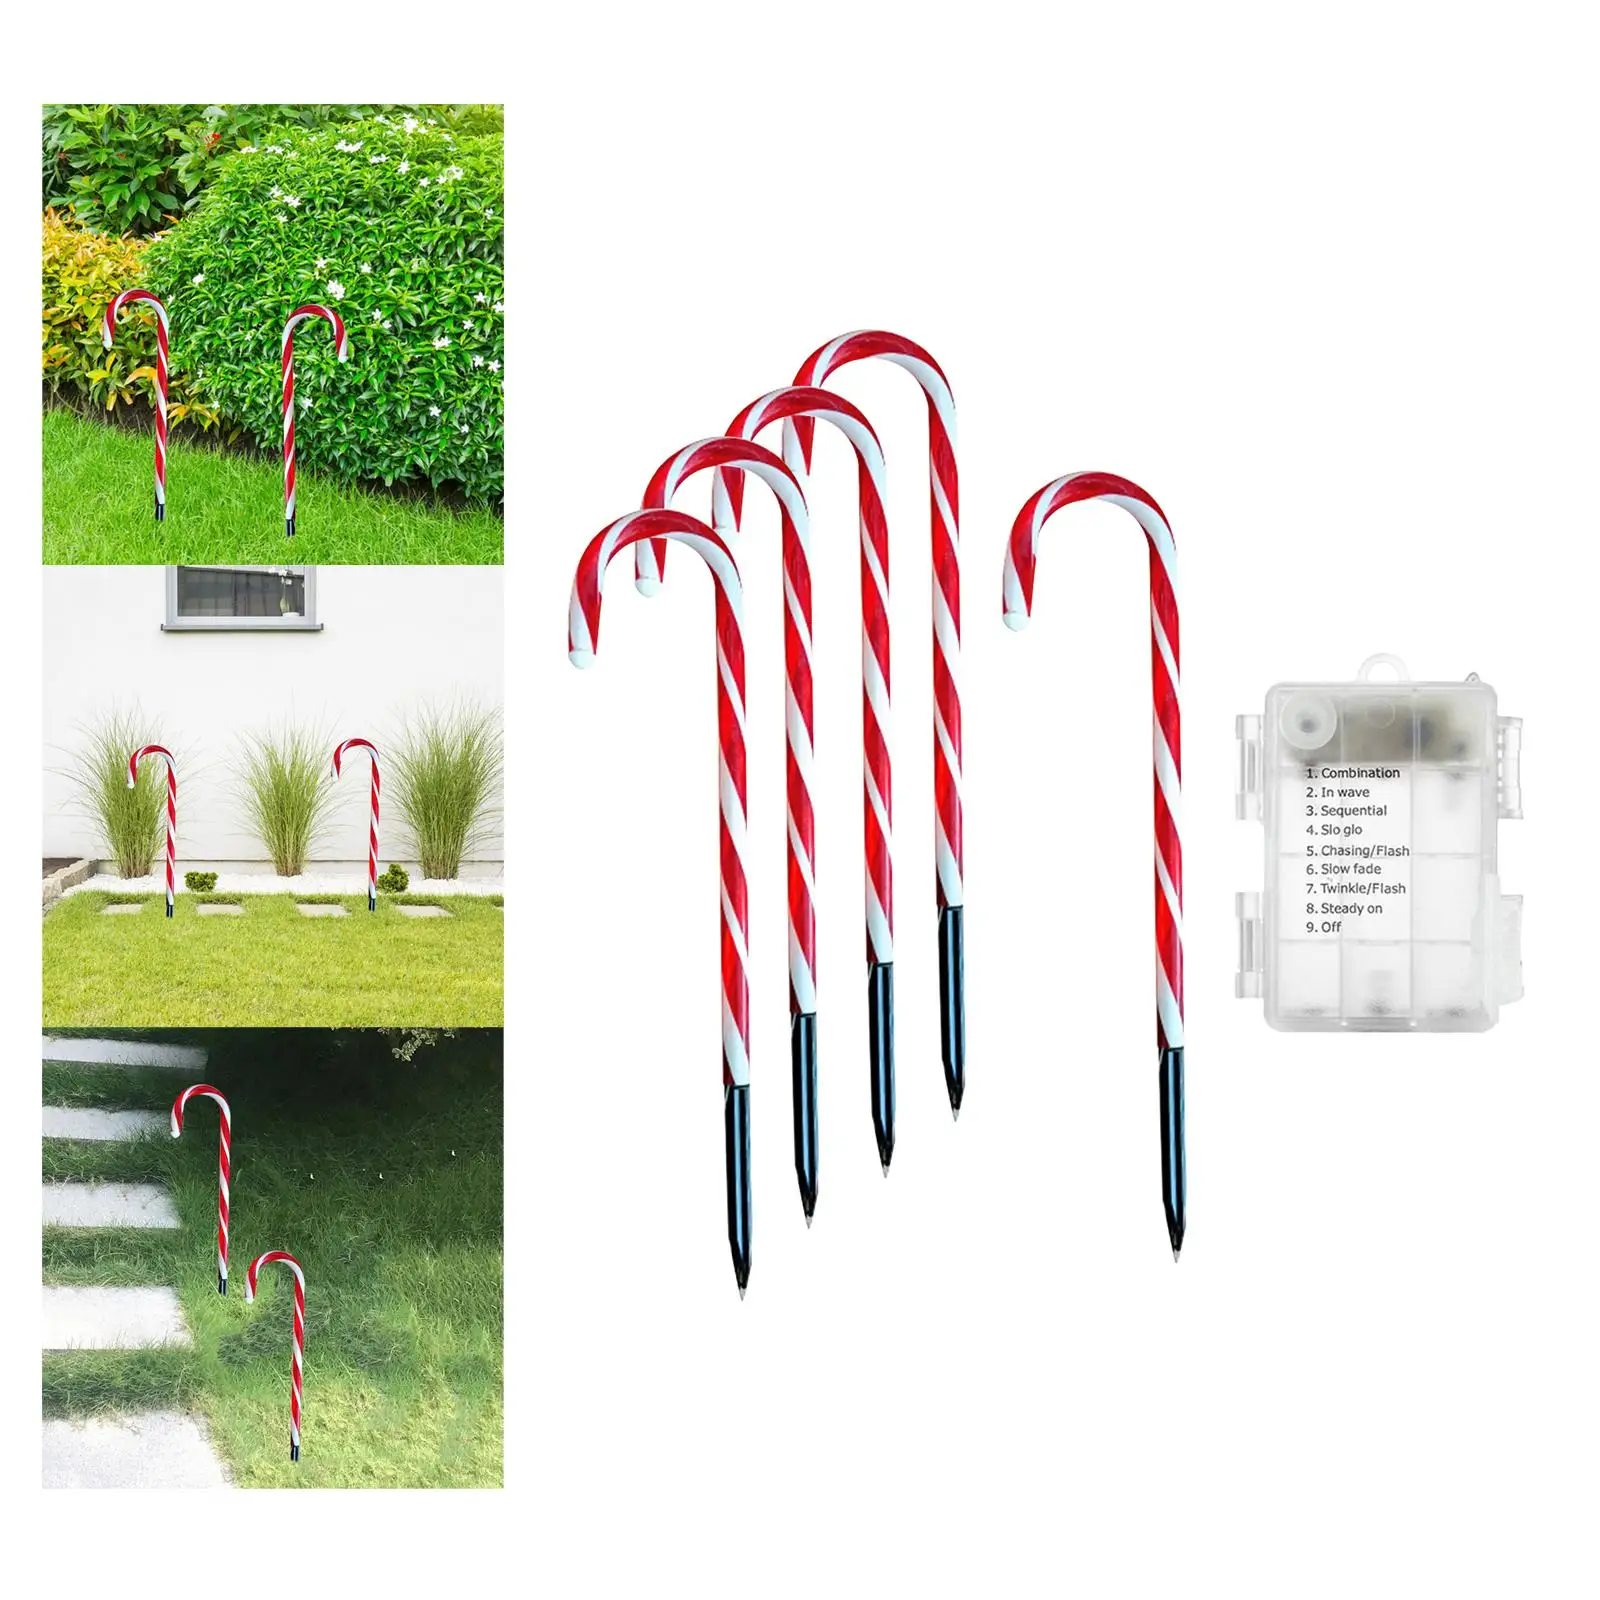 Christmas LED Lamps Decor Pathway Marker with Ground Stakes String Waterproof Candy Cane Battery Powered Lights for Holiday Lawn